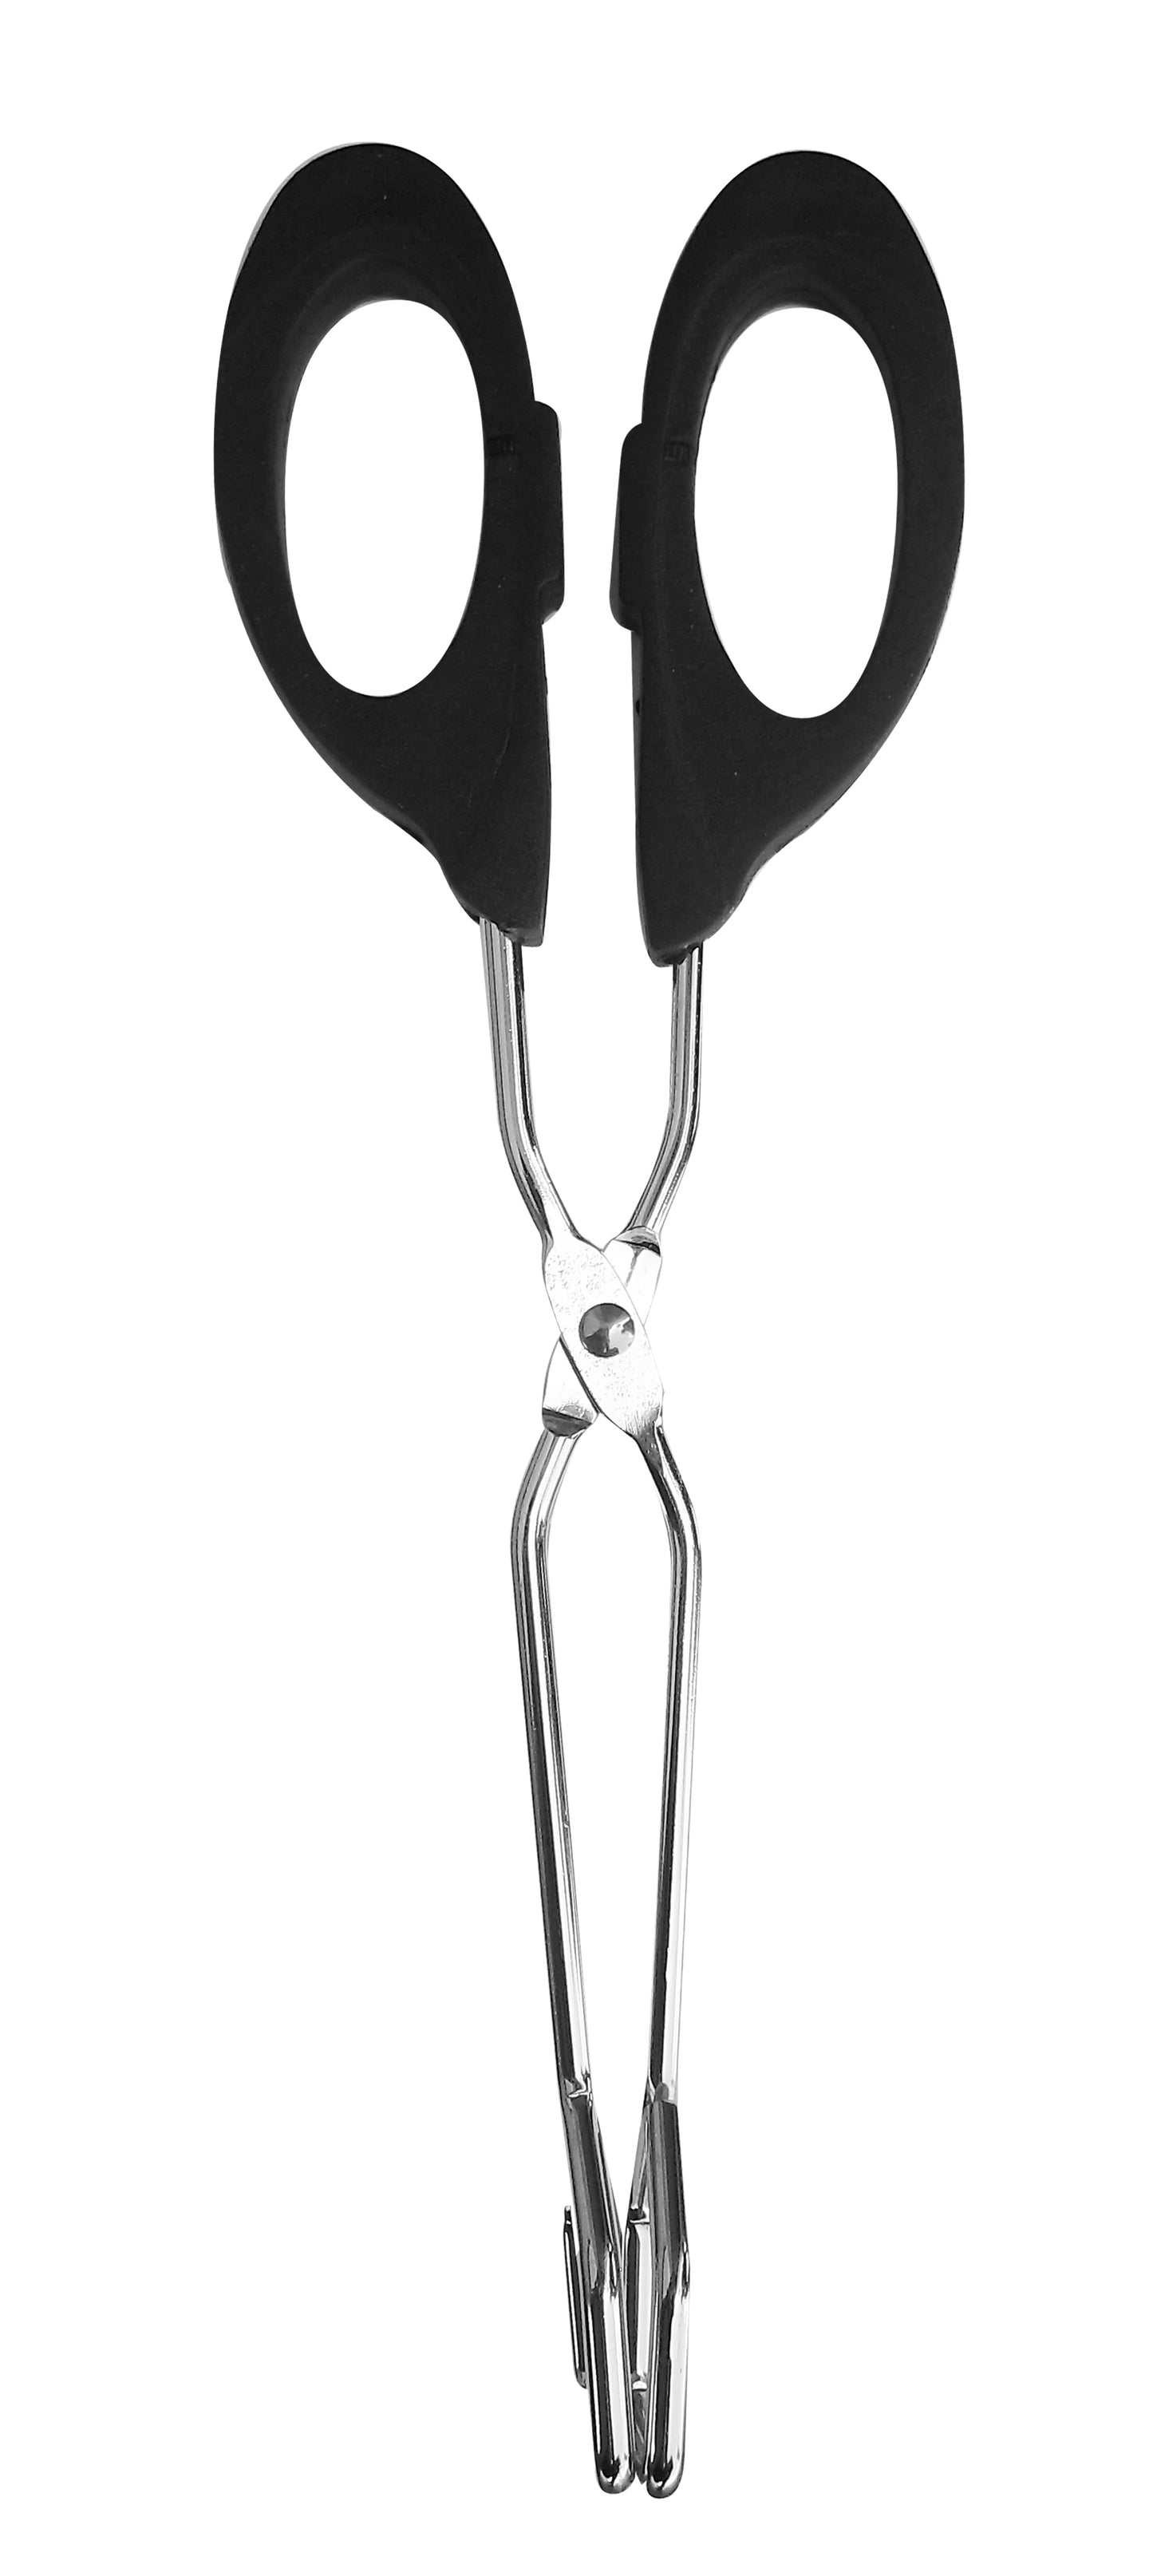 Choice 16 Silicone Tip Locking Tongs with Black Non-Slip Grip Handle